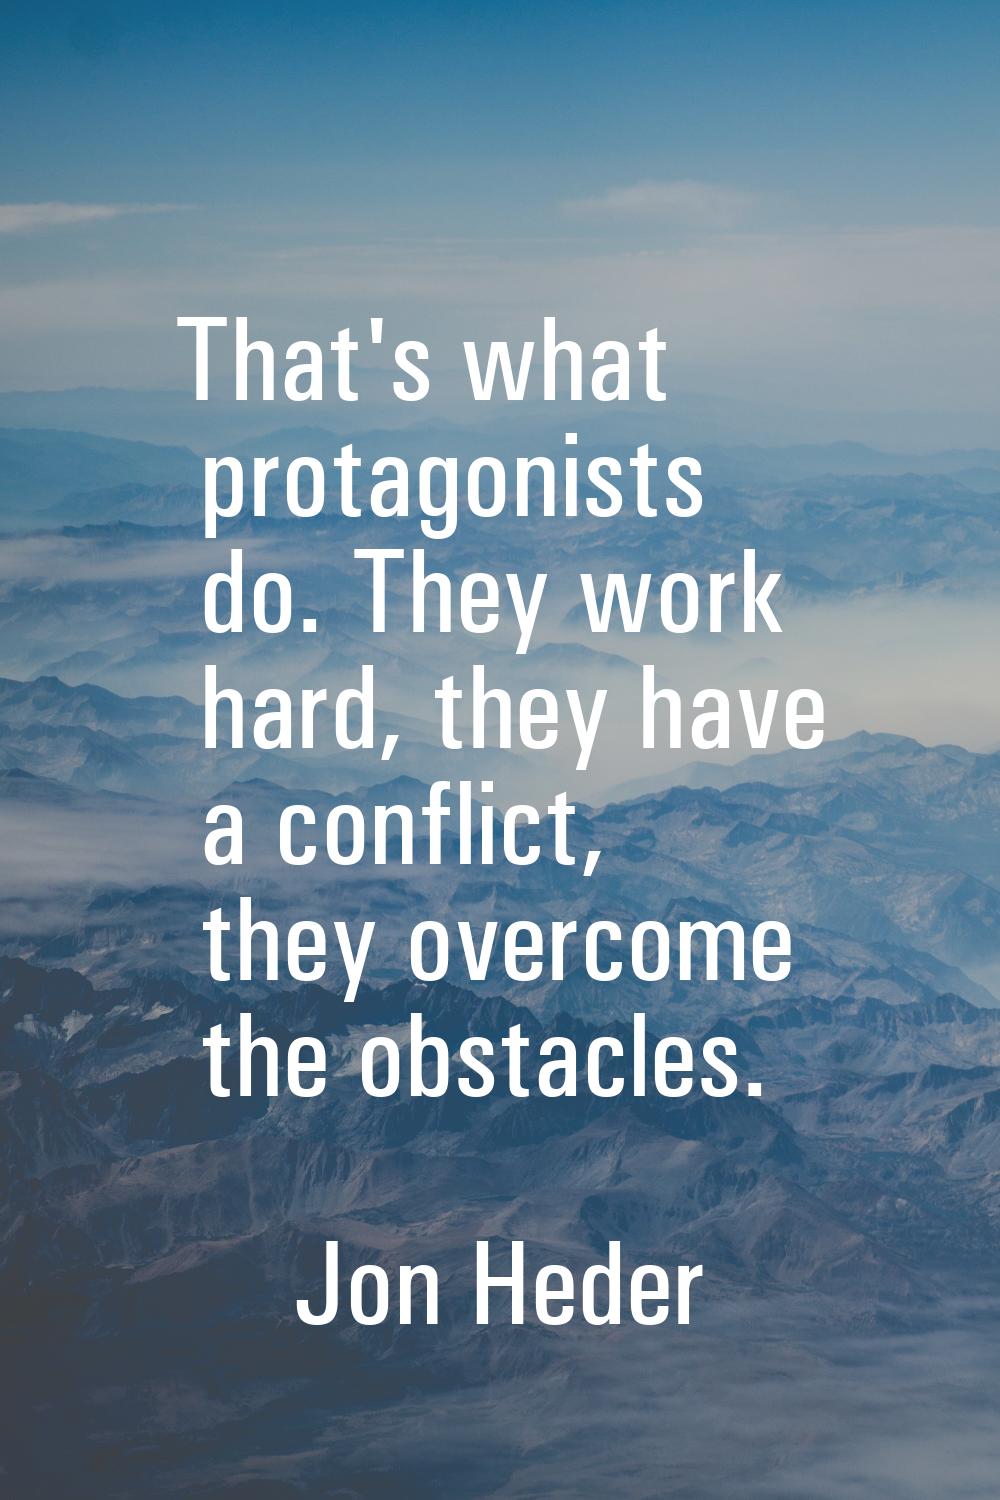 That's what protagonists do. They work hard, they have a conflict, they overcome the obstacles.